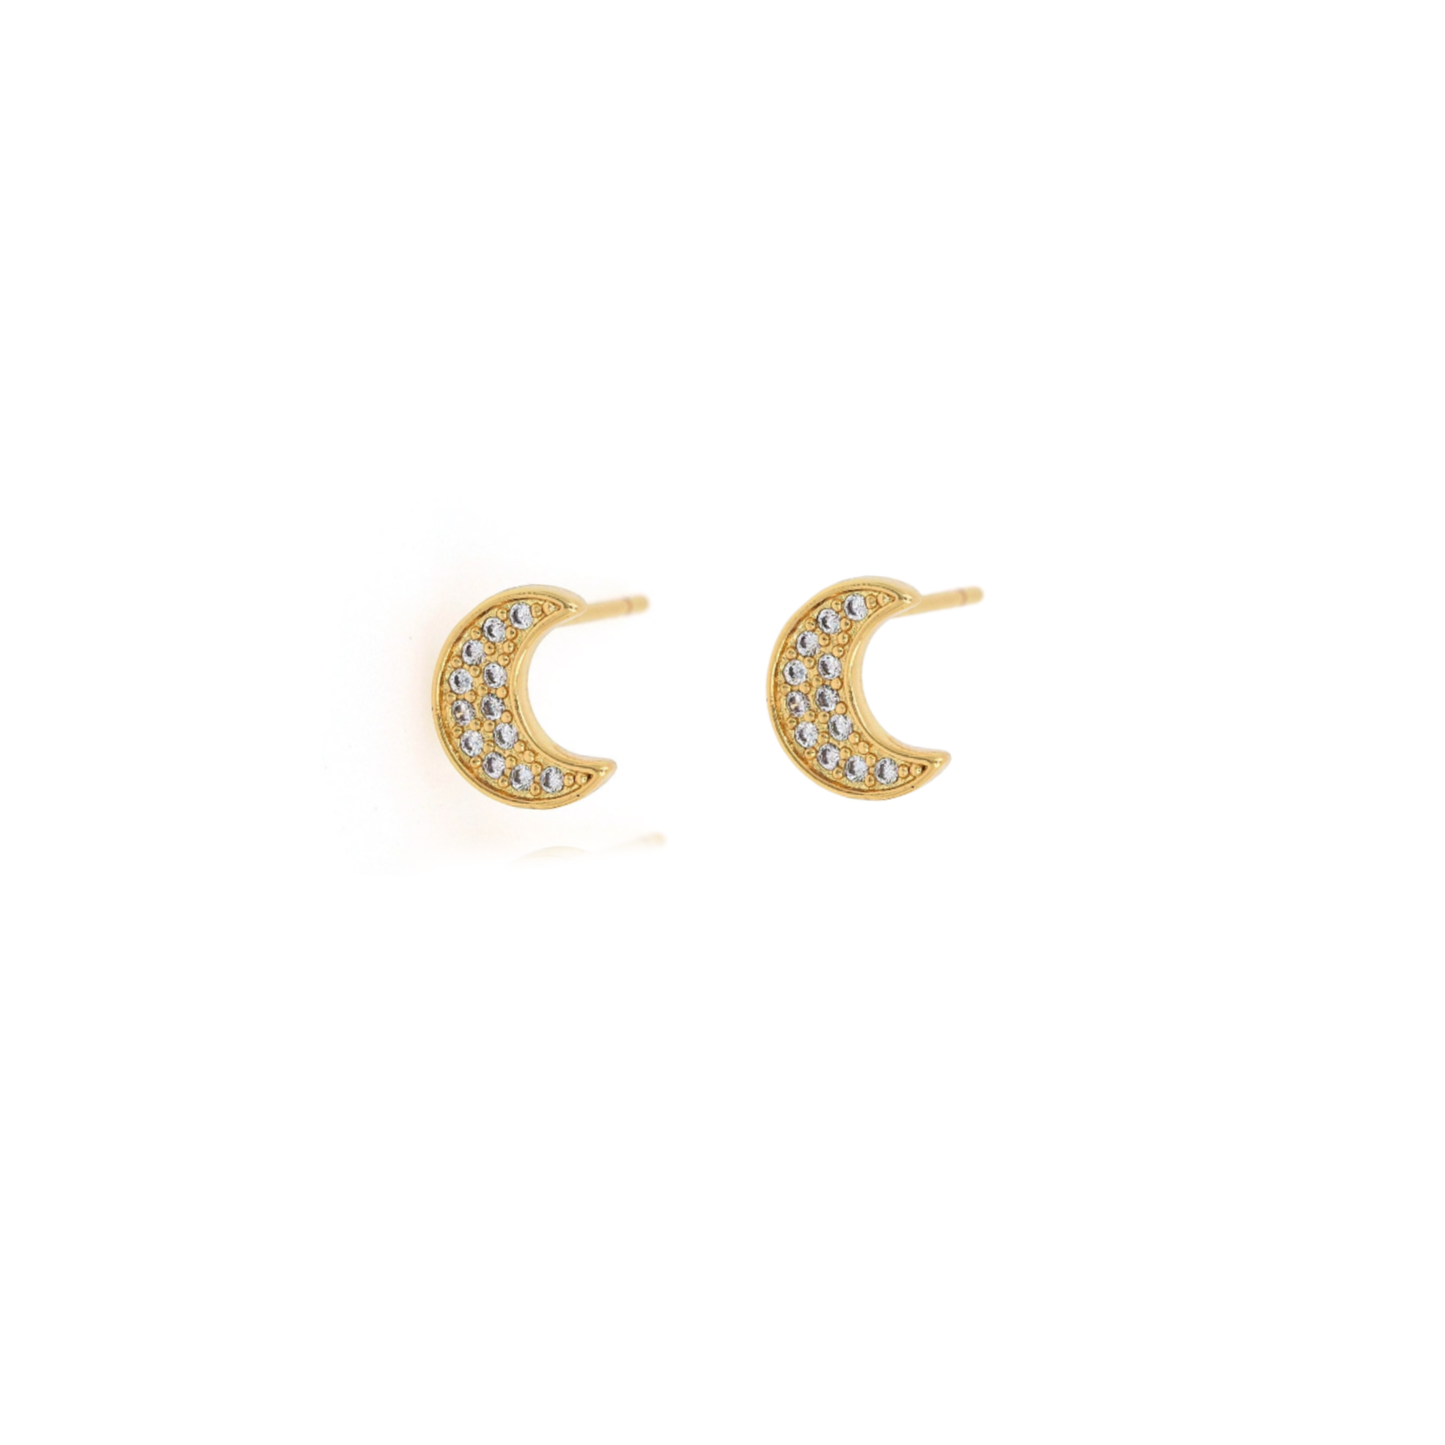 Pave Crescent Moon Stud Earrings